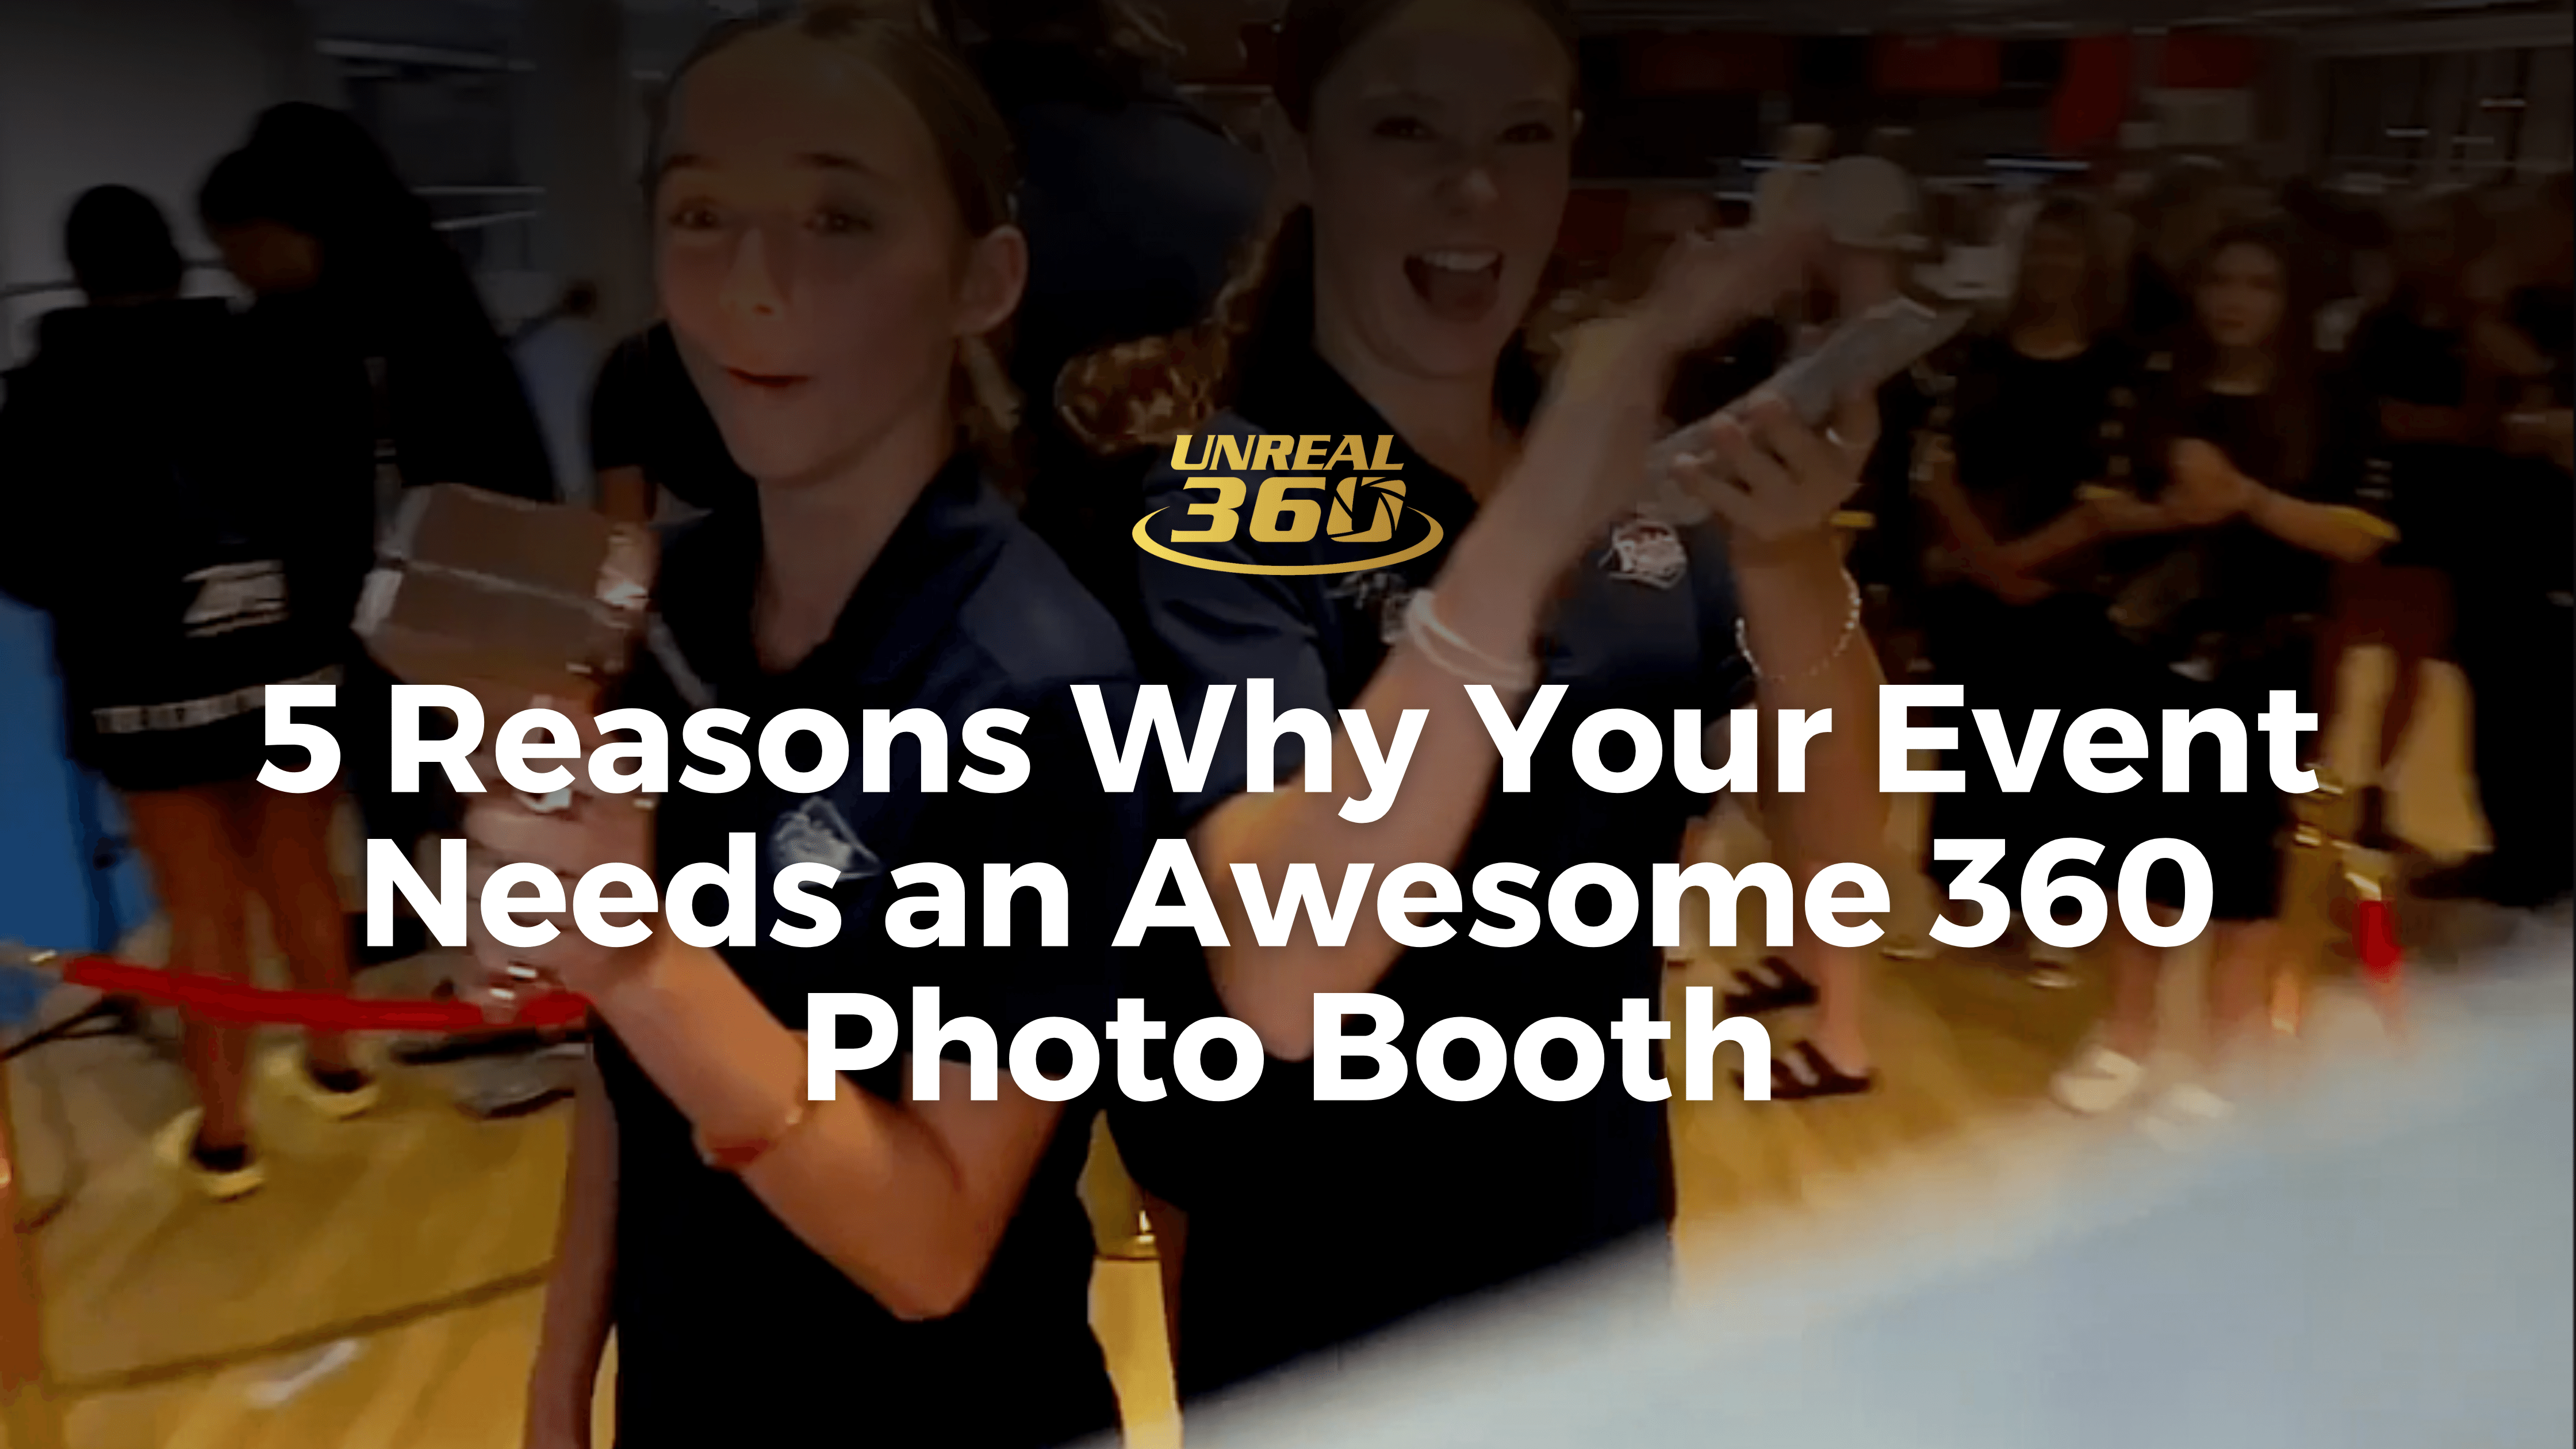 5 Reasons Your Events Need An Awesome 360 Photo Booth